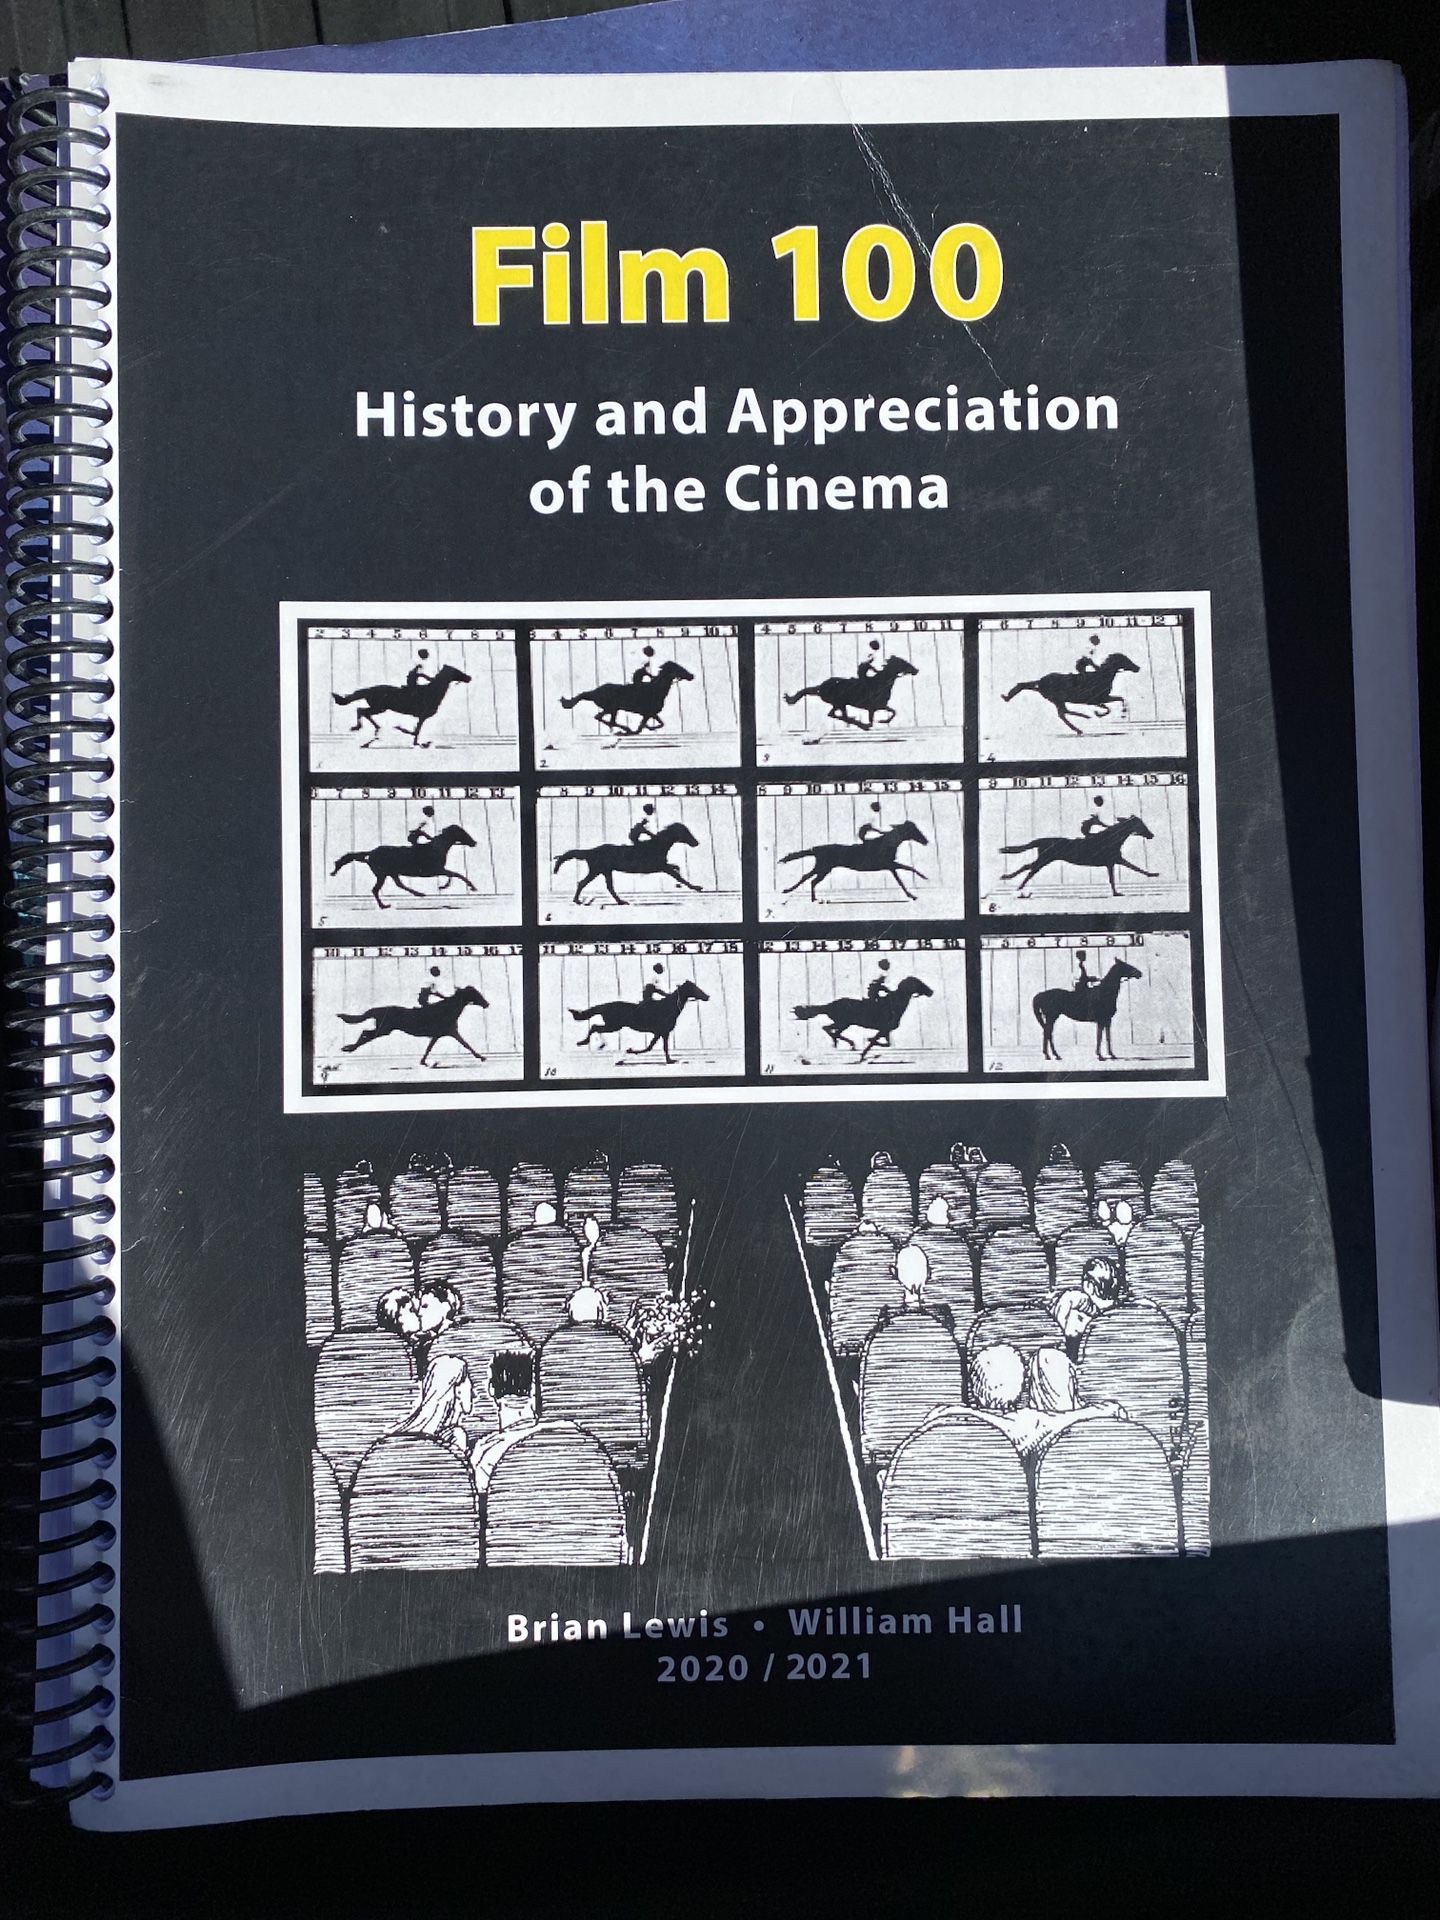 Film 100 history and appreciation of the cinema